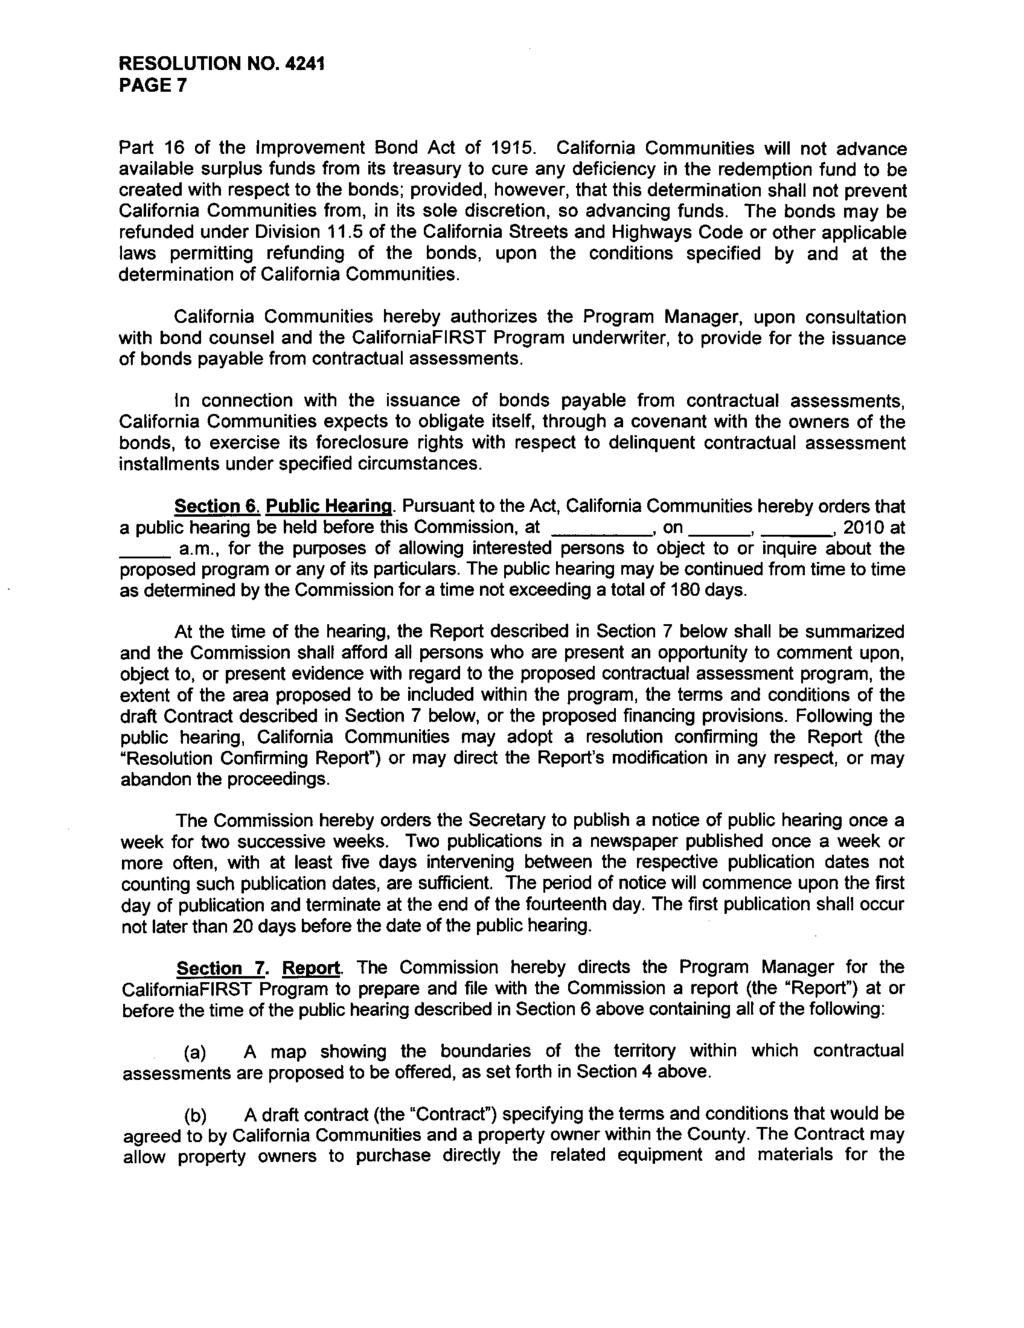 RESOLUTION NO. 4241 PAGE7 Part 16 of the Improvement Bond Act of 1915.